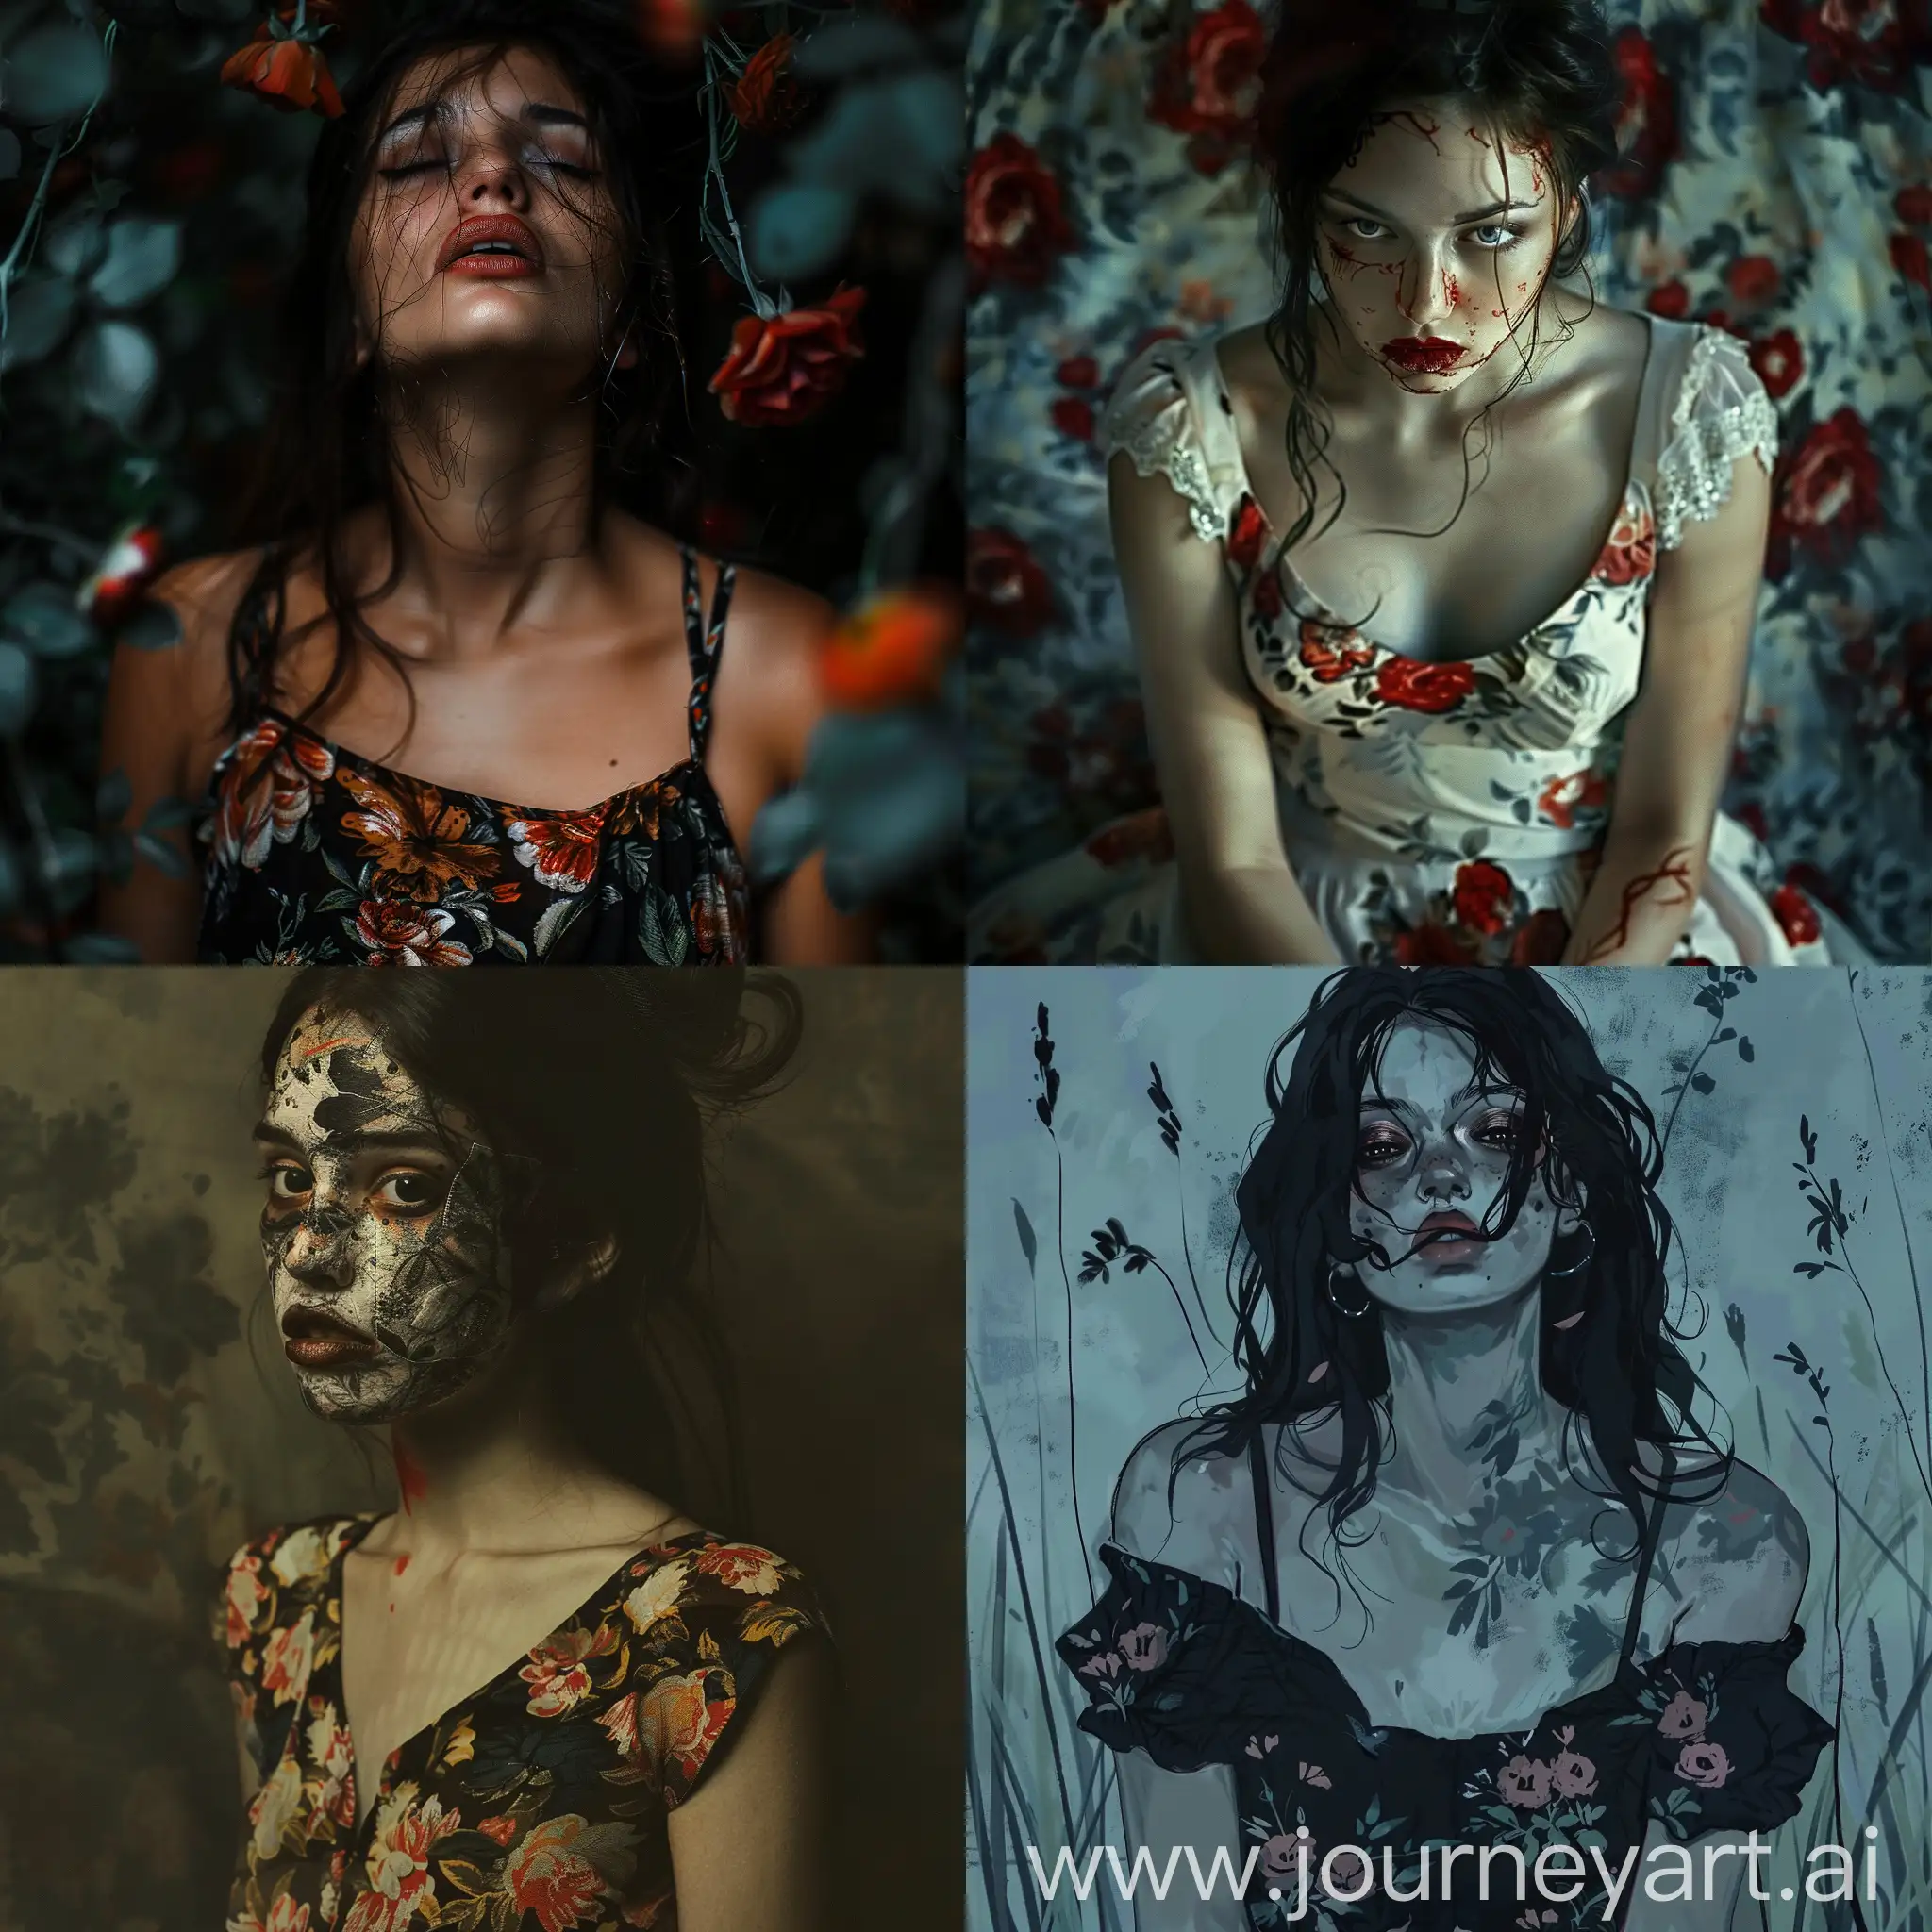 A scary girl face with beautiful body, wearing floral dress